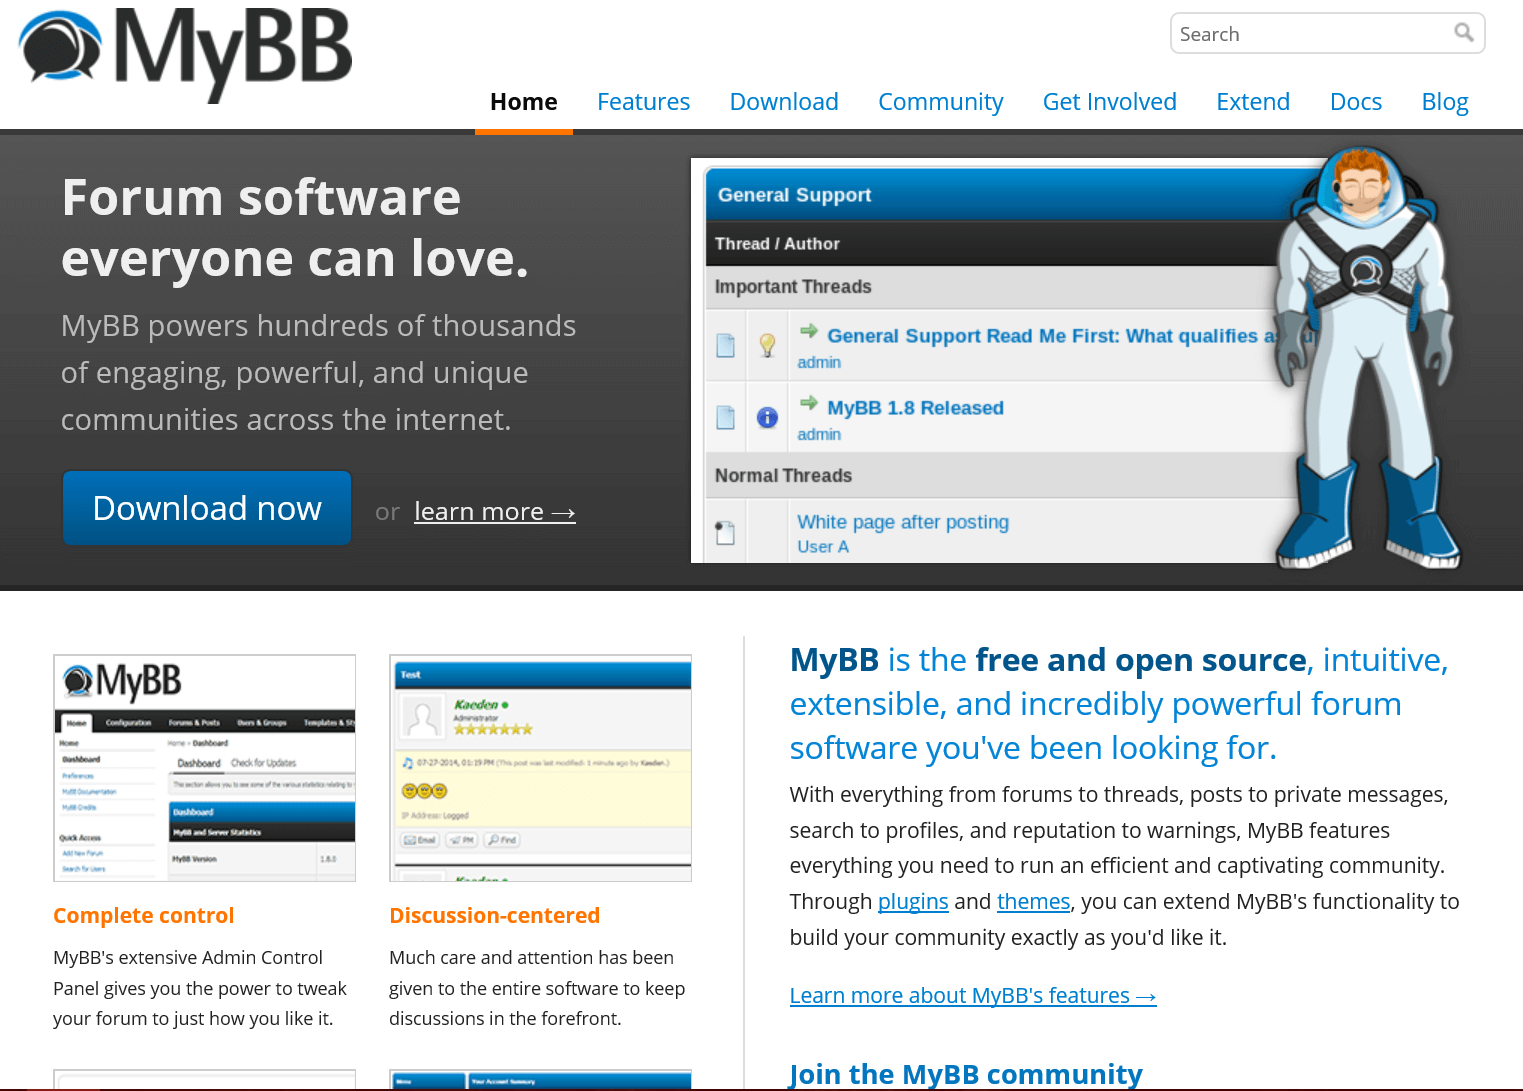 mybb-review-2020-pros-cons-of-forum-software